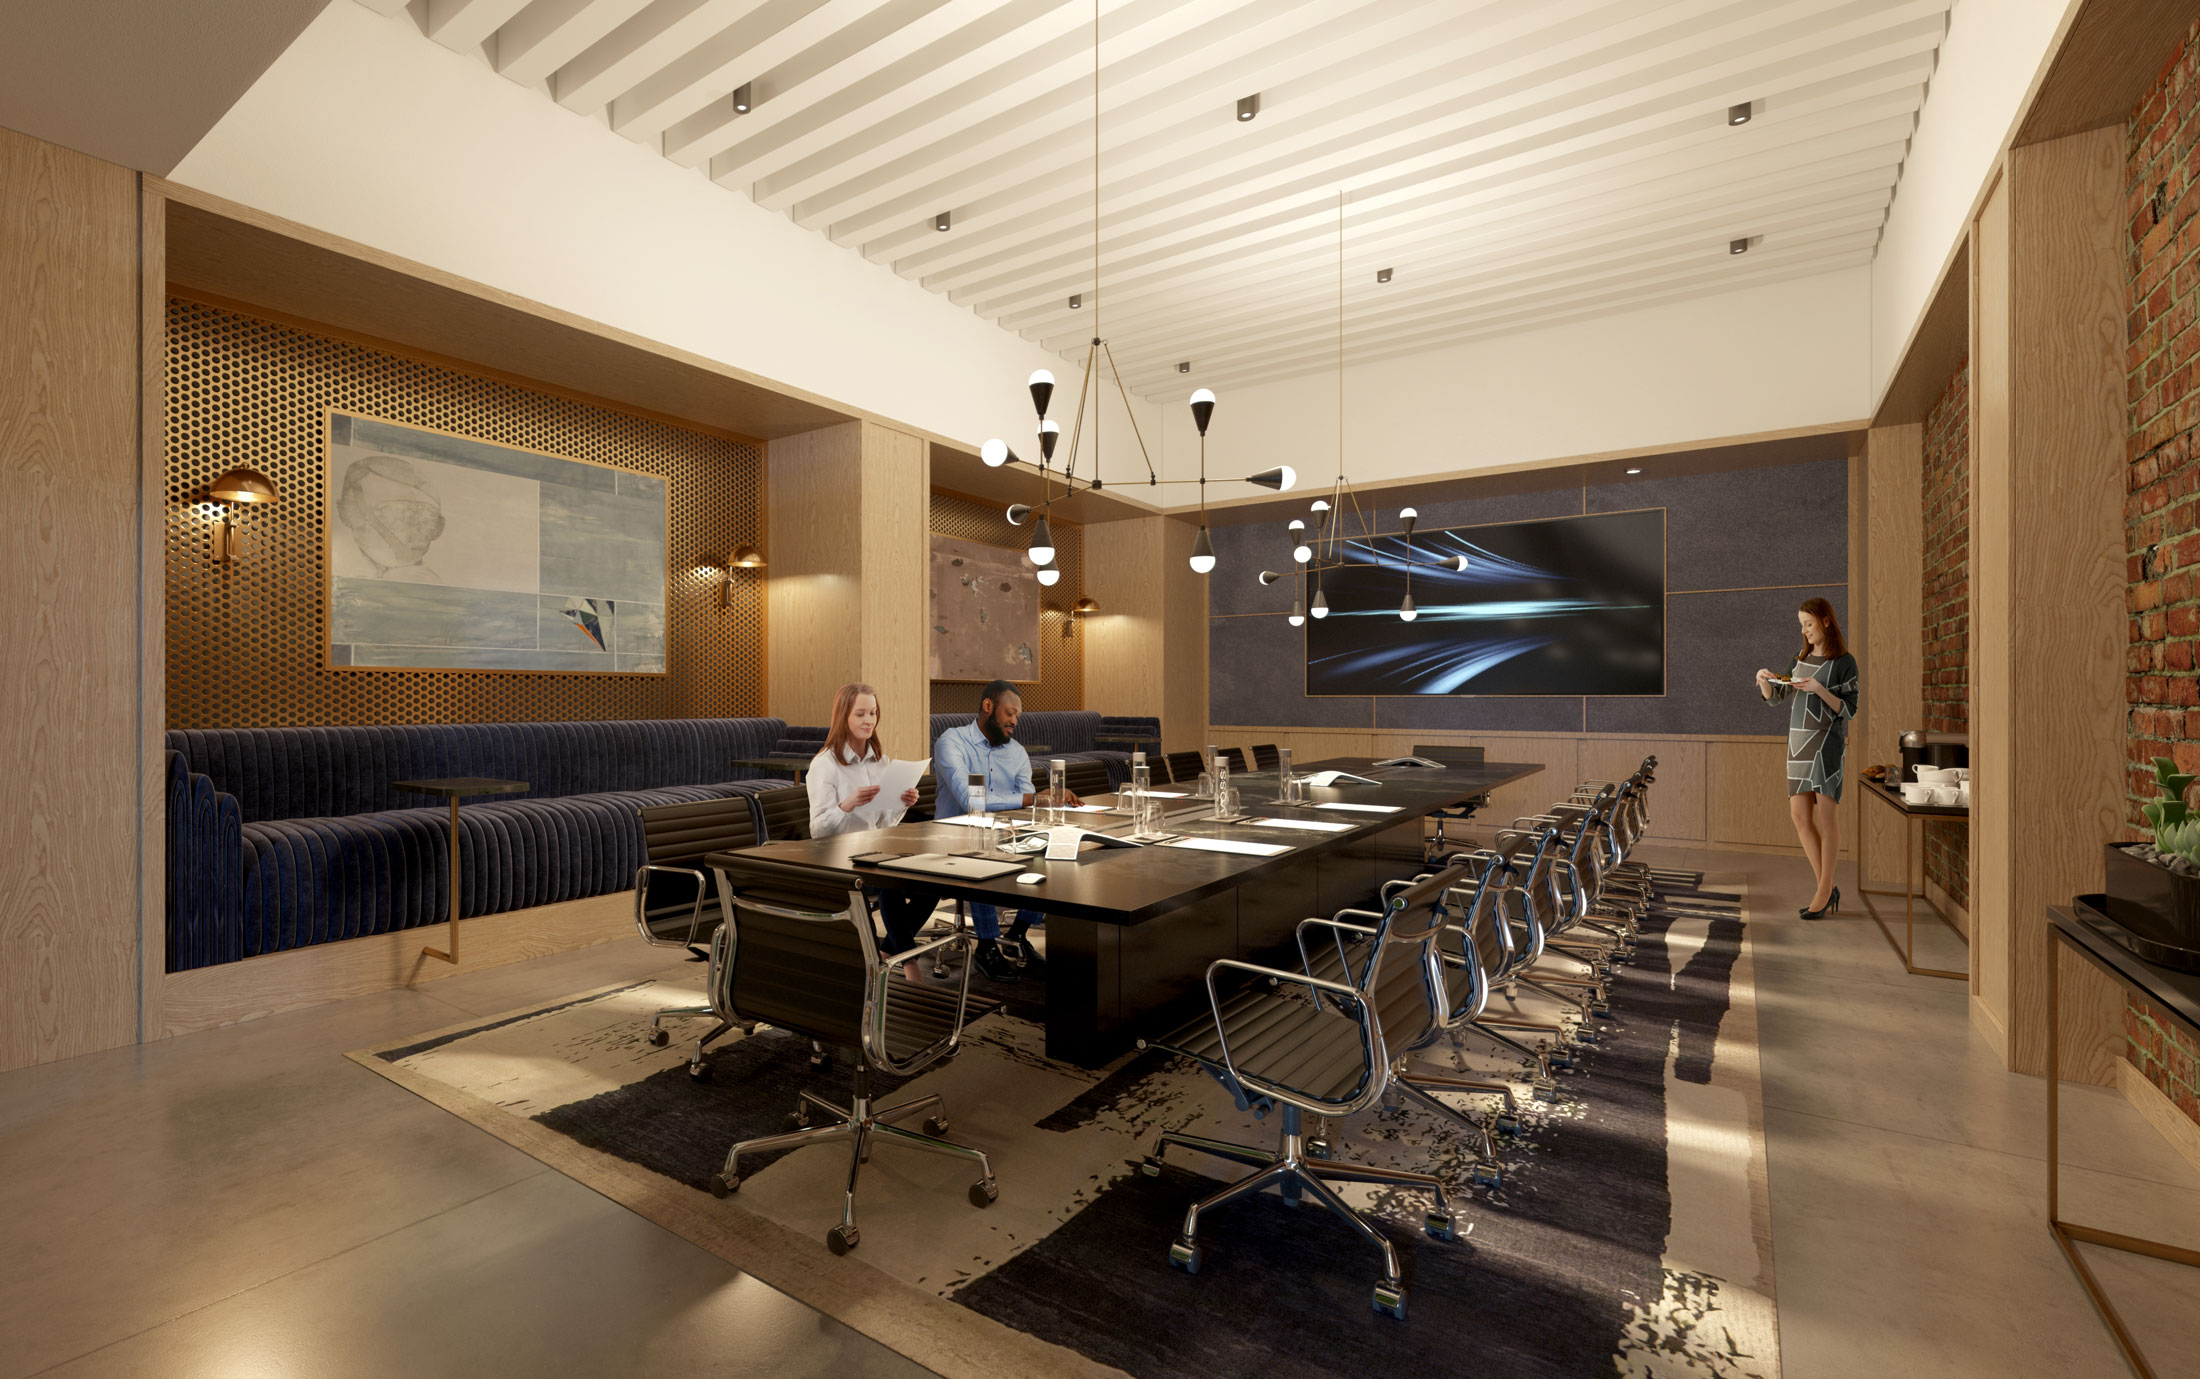 Architectural Rendering of the conference room of the 149 Madison project located in New York City